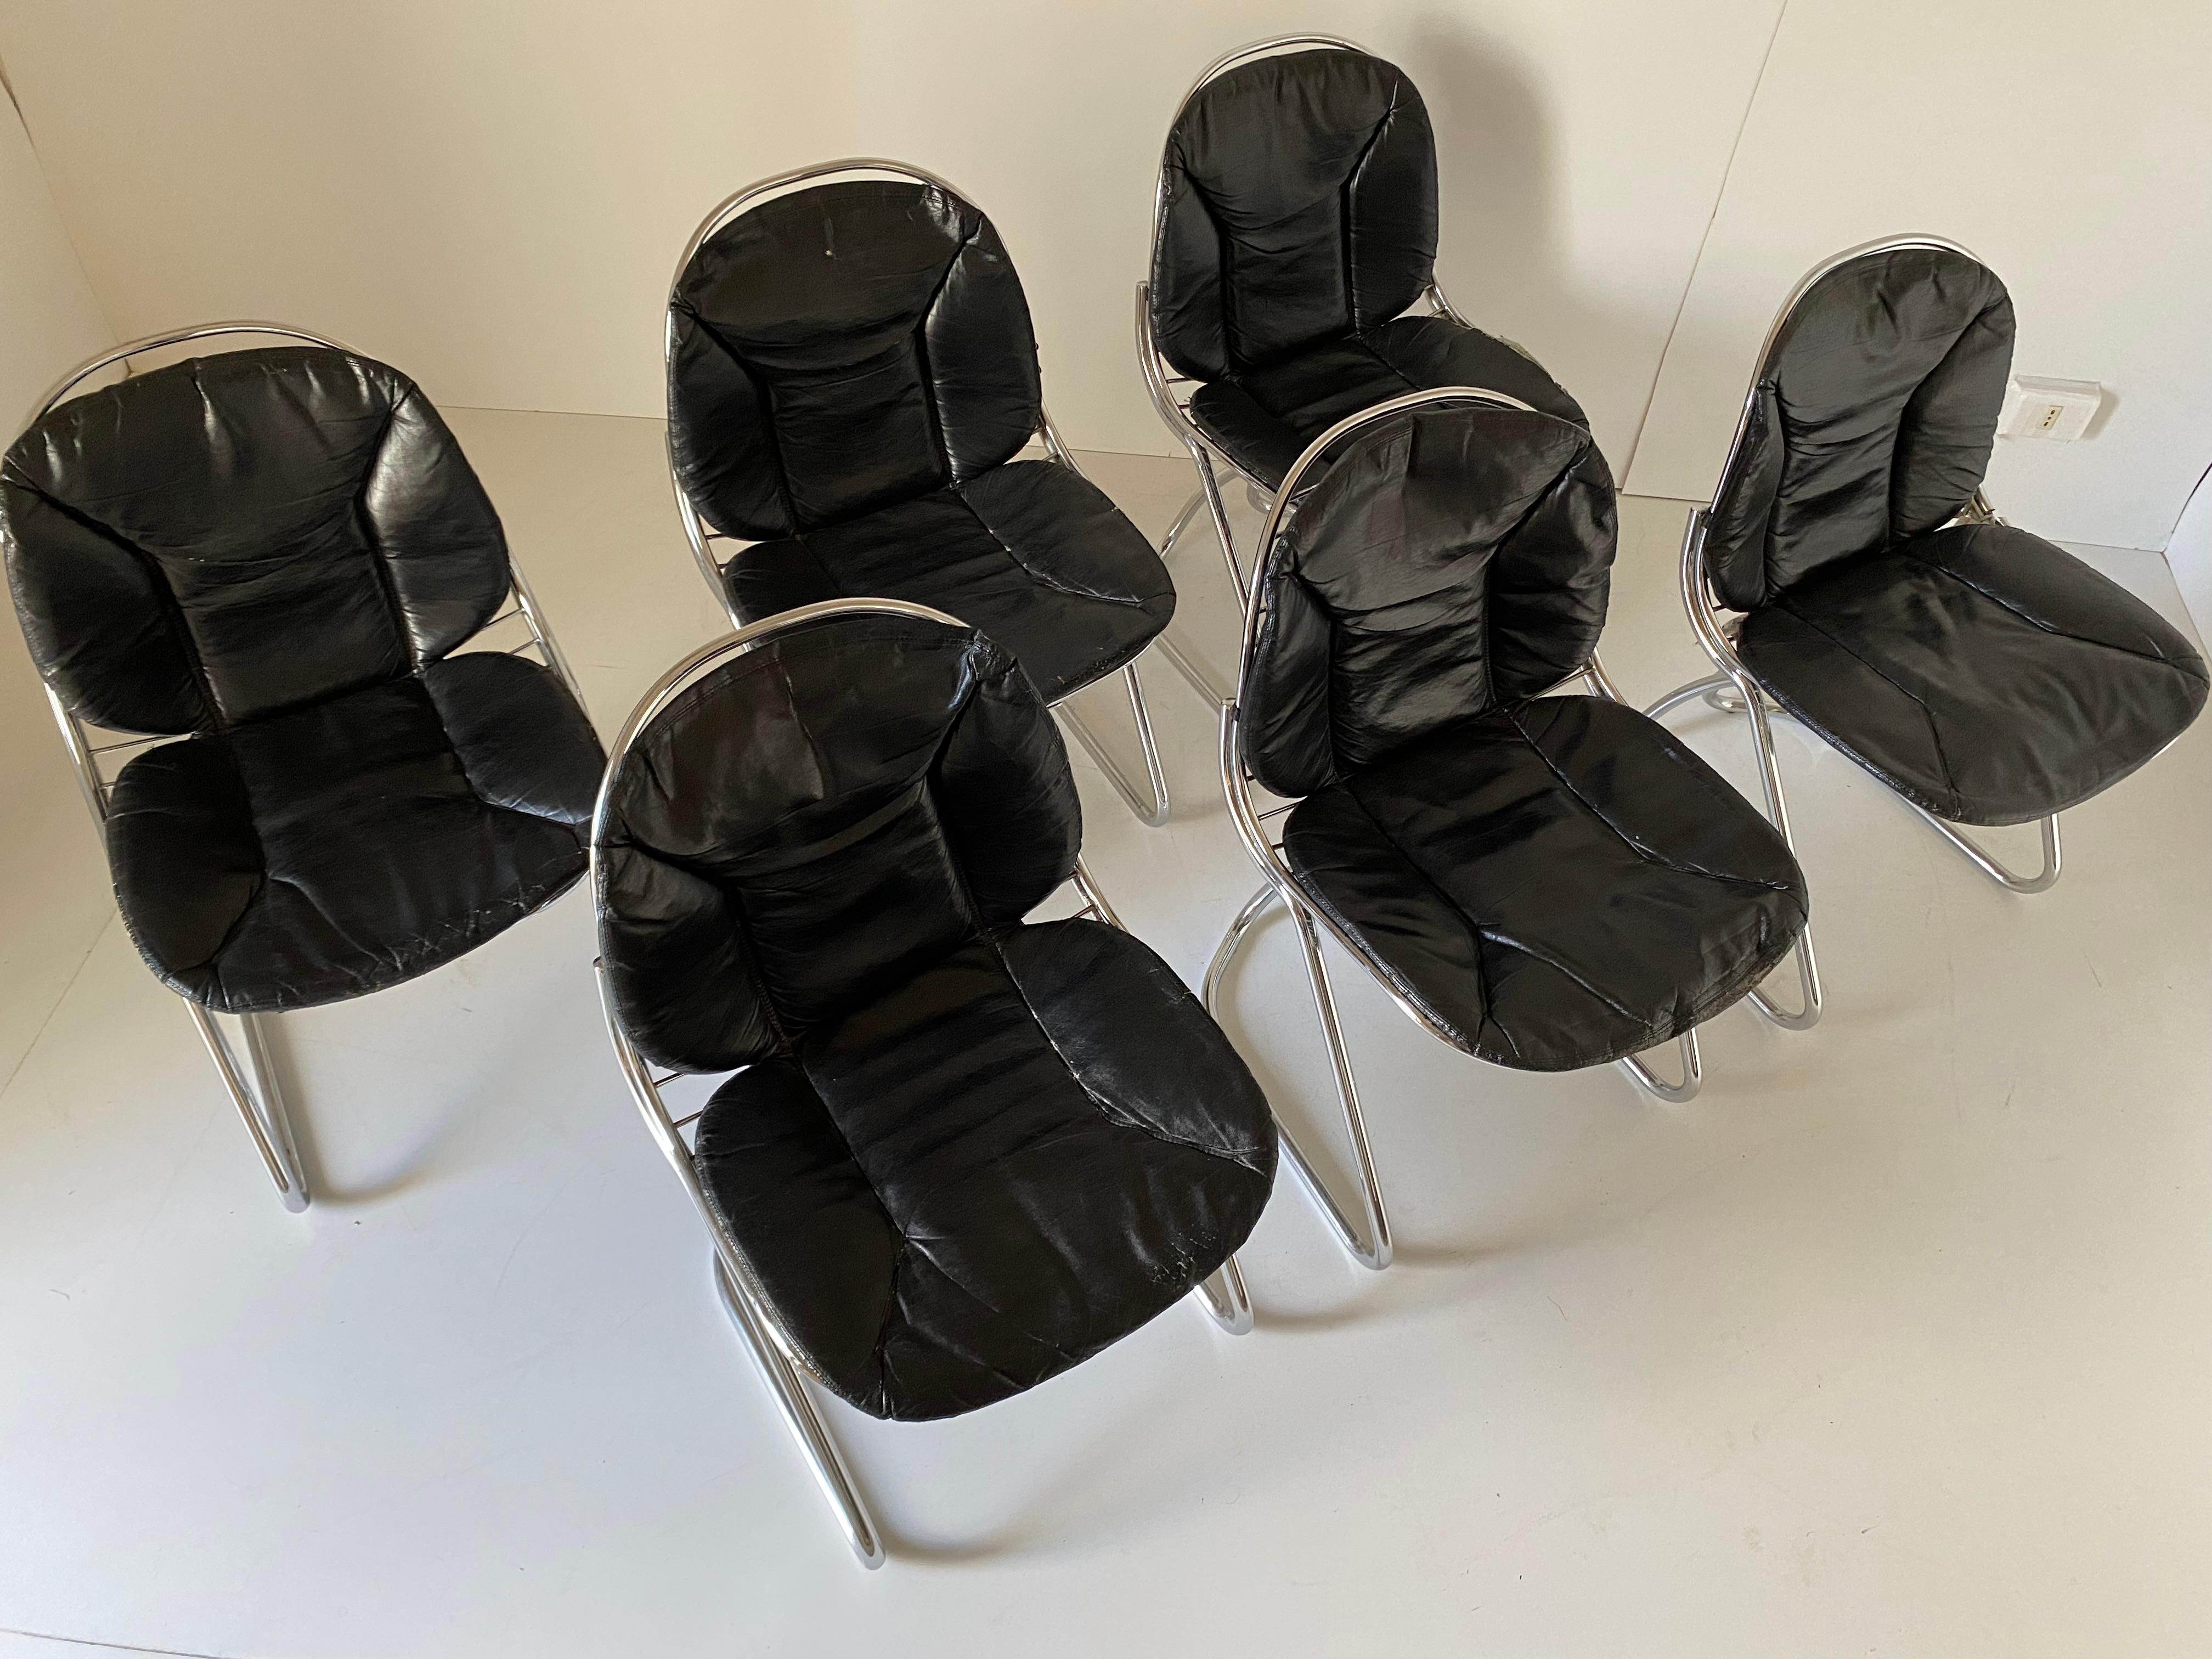 Space age chromed dining chairs, set of six, Gastone Rinaldi for RIMA, I970s
Set of six Italian mid century steel dining chairs designed by Gastone Rinaldi for Rima, 1970s
The chairs are made of fine tubular chromed steel beautifully shaped. Six